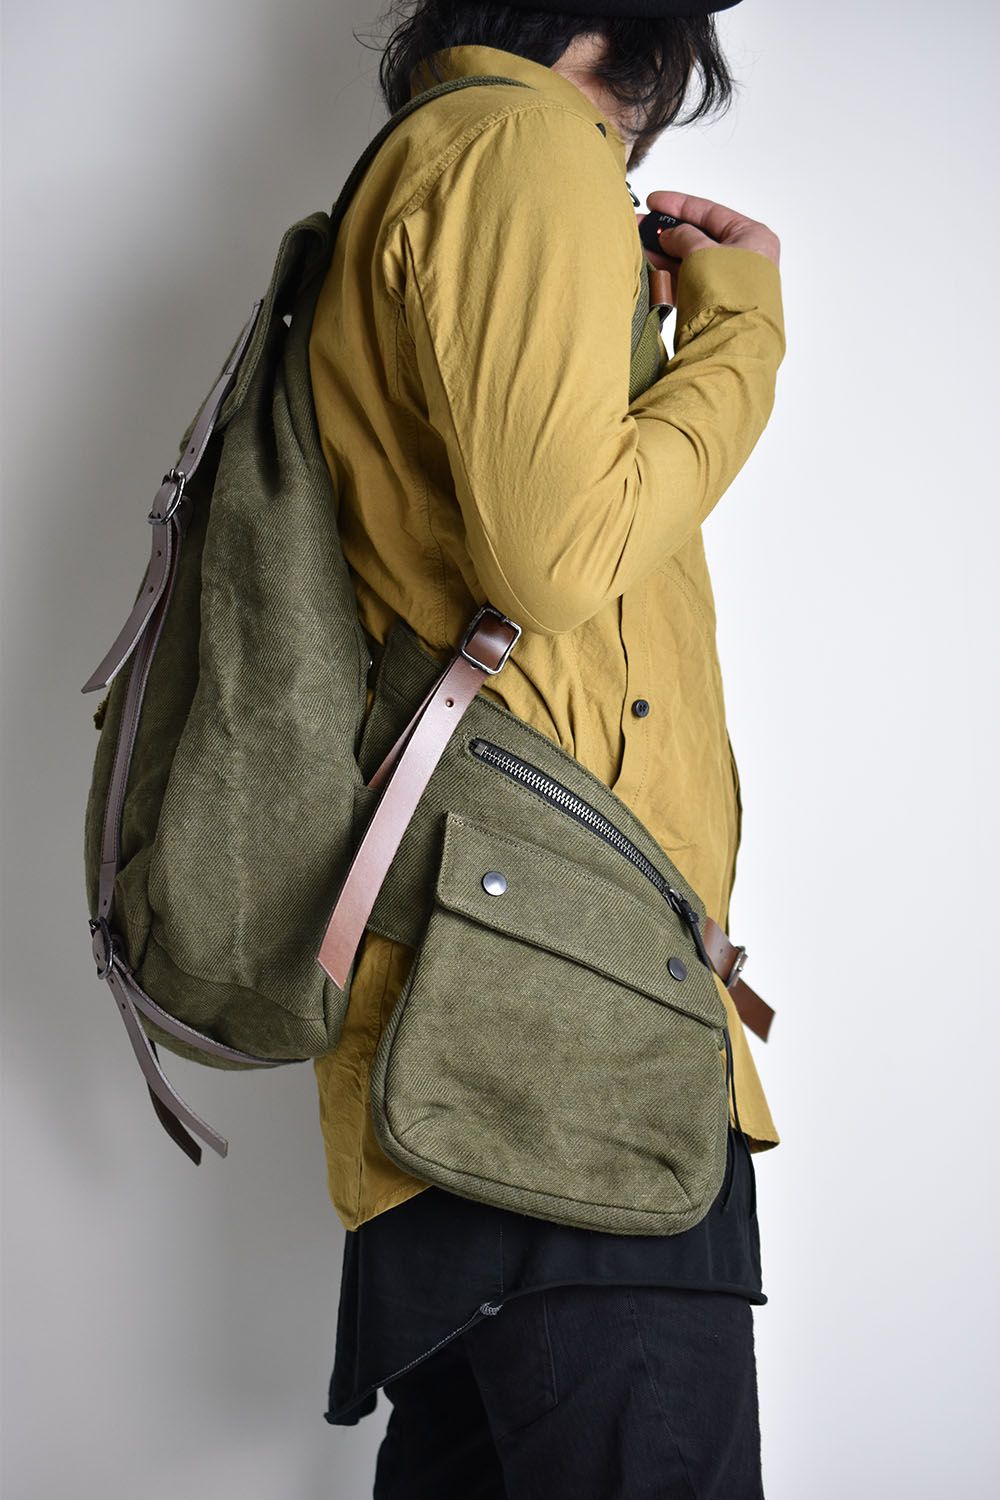 Jute x Cotton Military Twill Bag Attached Bag Pack"Khaki"/ジュート×コットン ミリタリーツイルバッグ"カーキ"